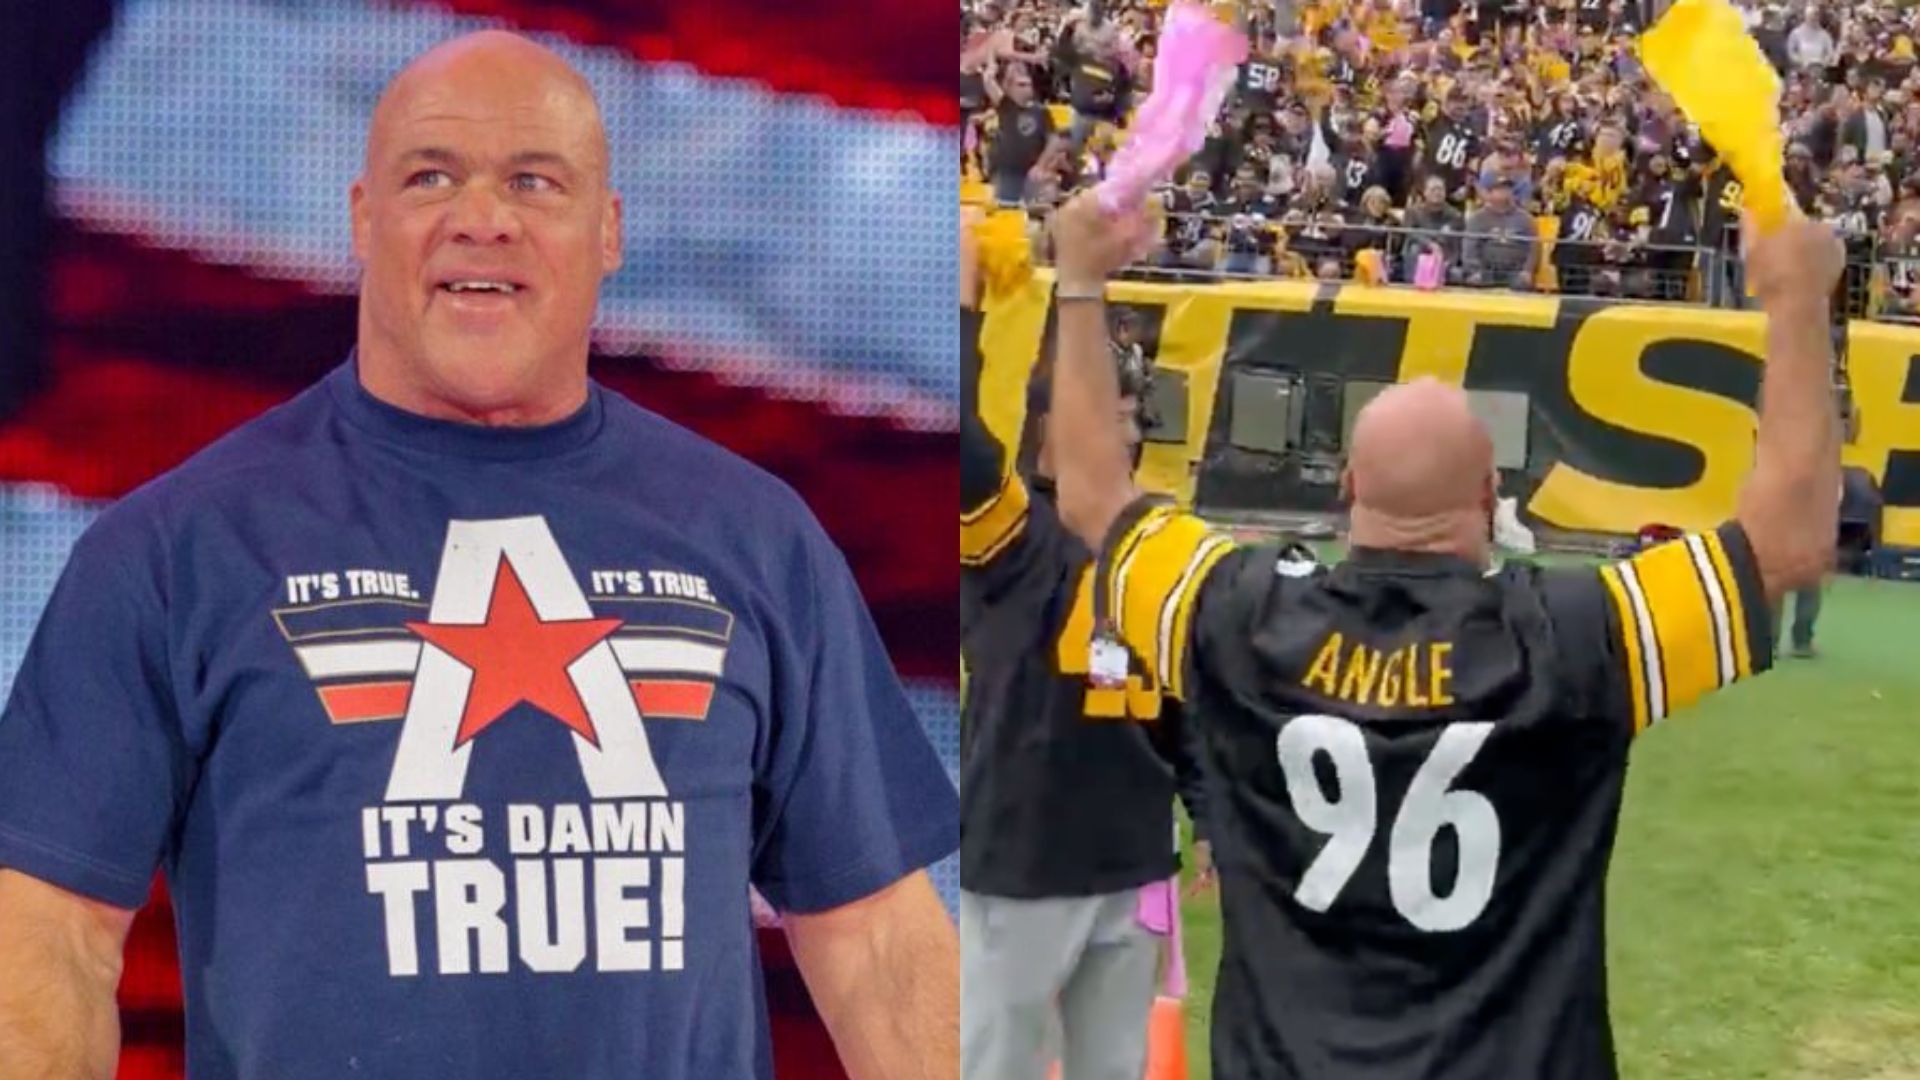 WWE Hall of Famer Kurt Angle appeared at a football game today